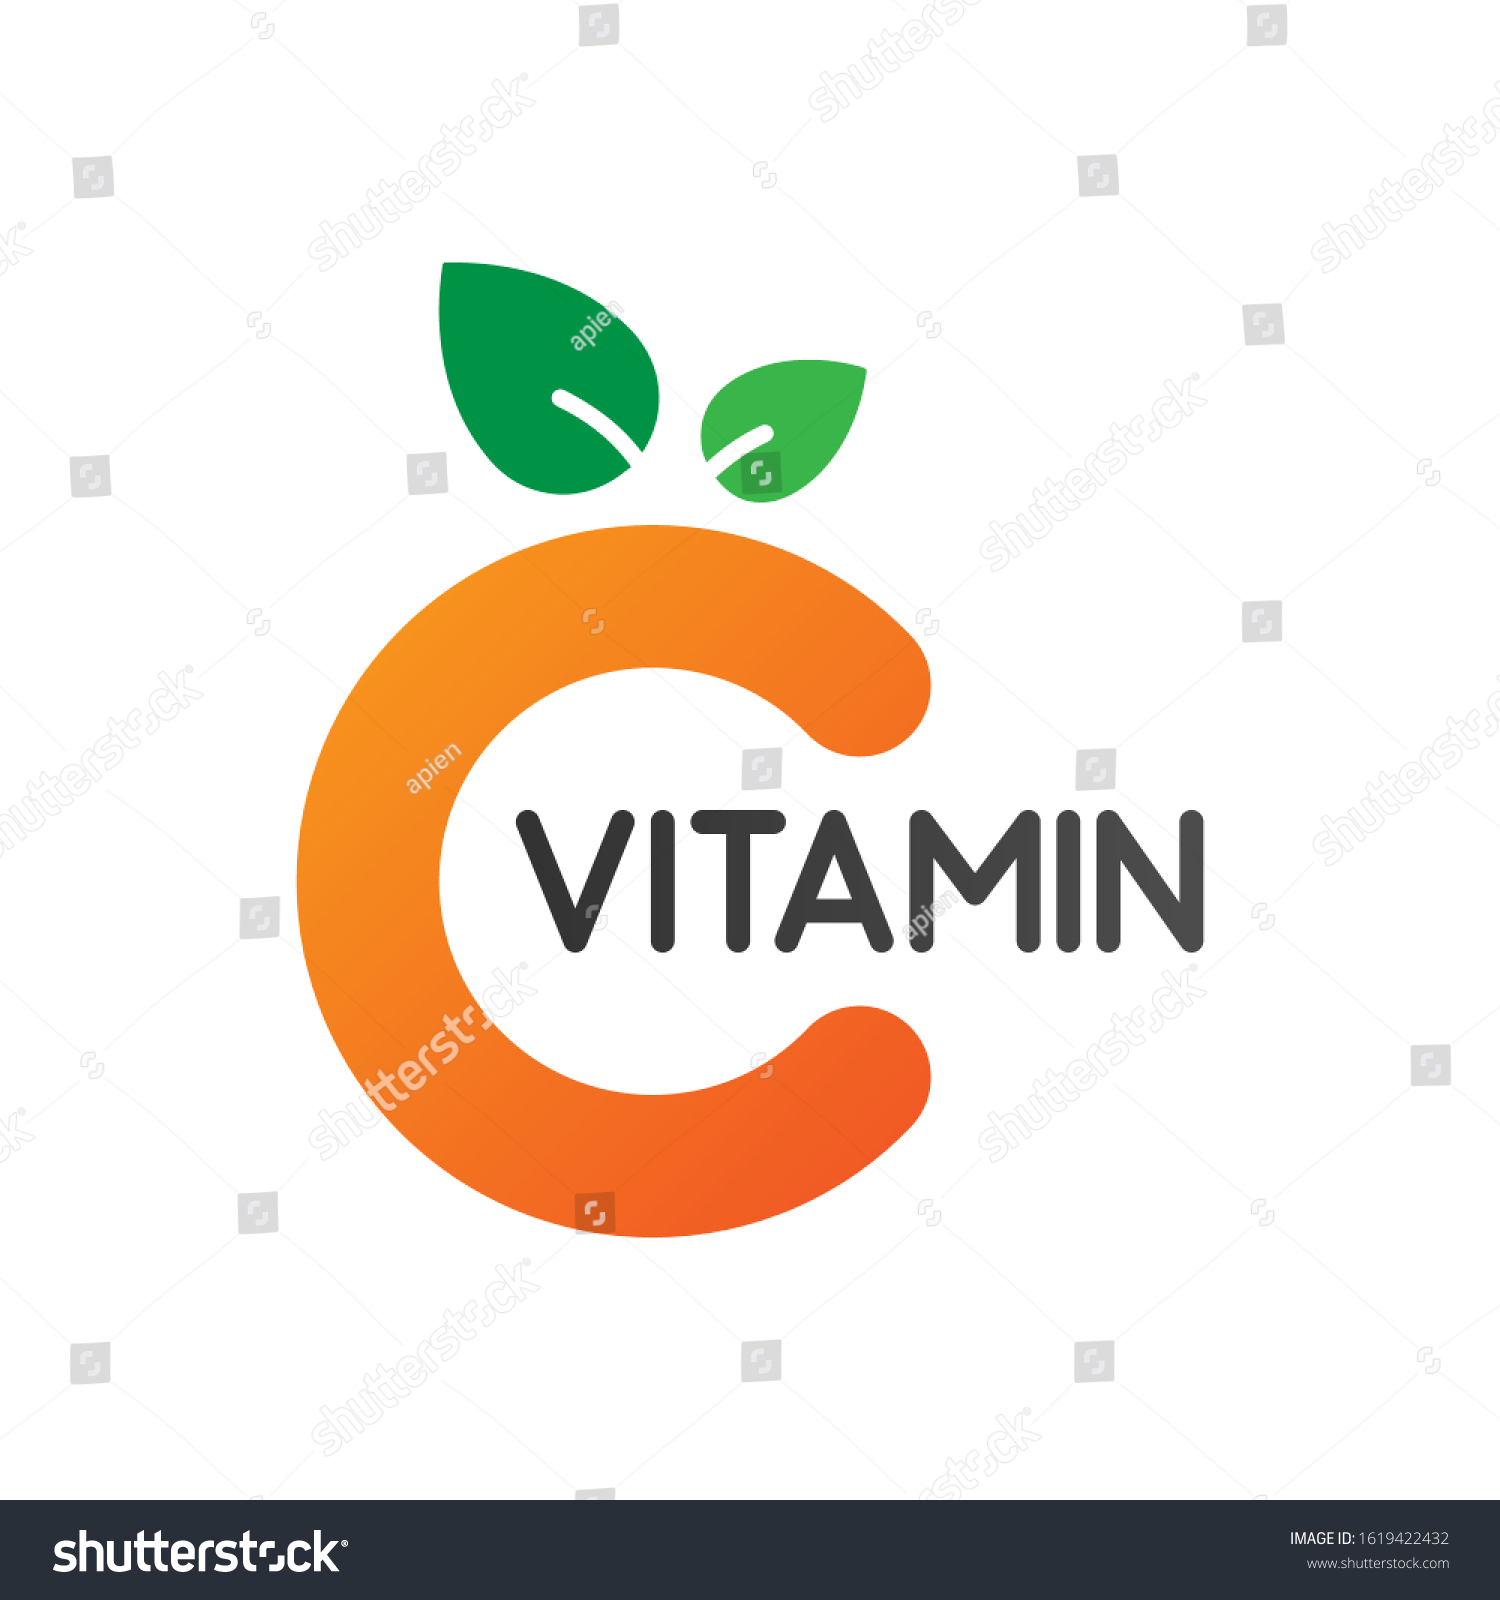 illustration vector graphic of citrus fruit like the letter C with two green leaves on it which illustrates vitamin C, for a company logo or symbol #1619422432